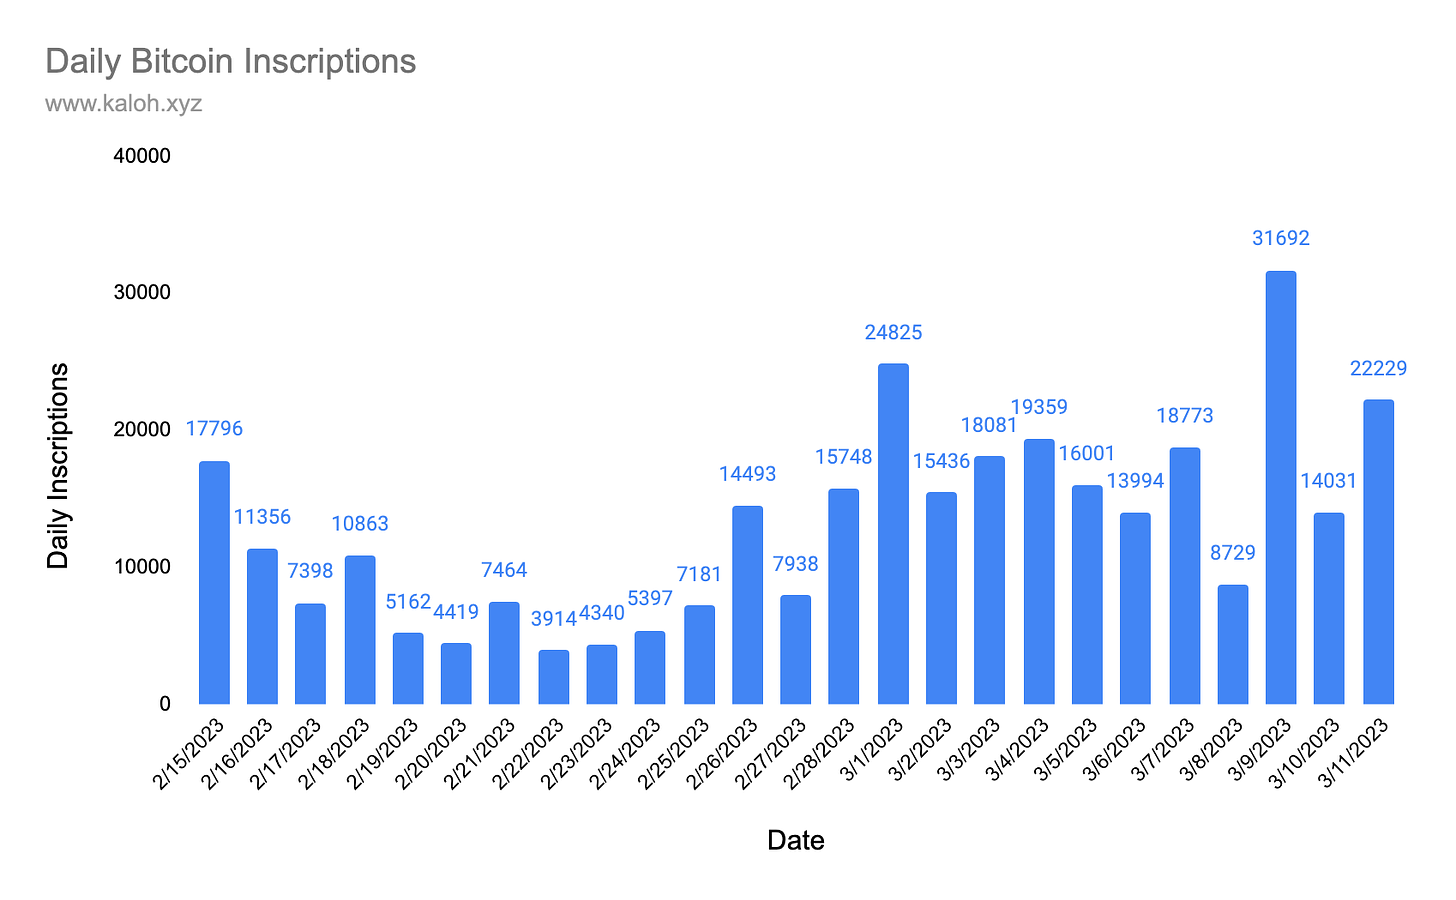 Daily Inscriptions have been trending up, with the highest recorded day being March 9, 2023, with over 32k inscriptions.